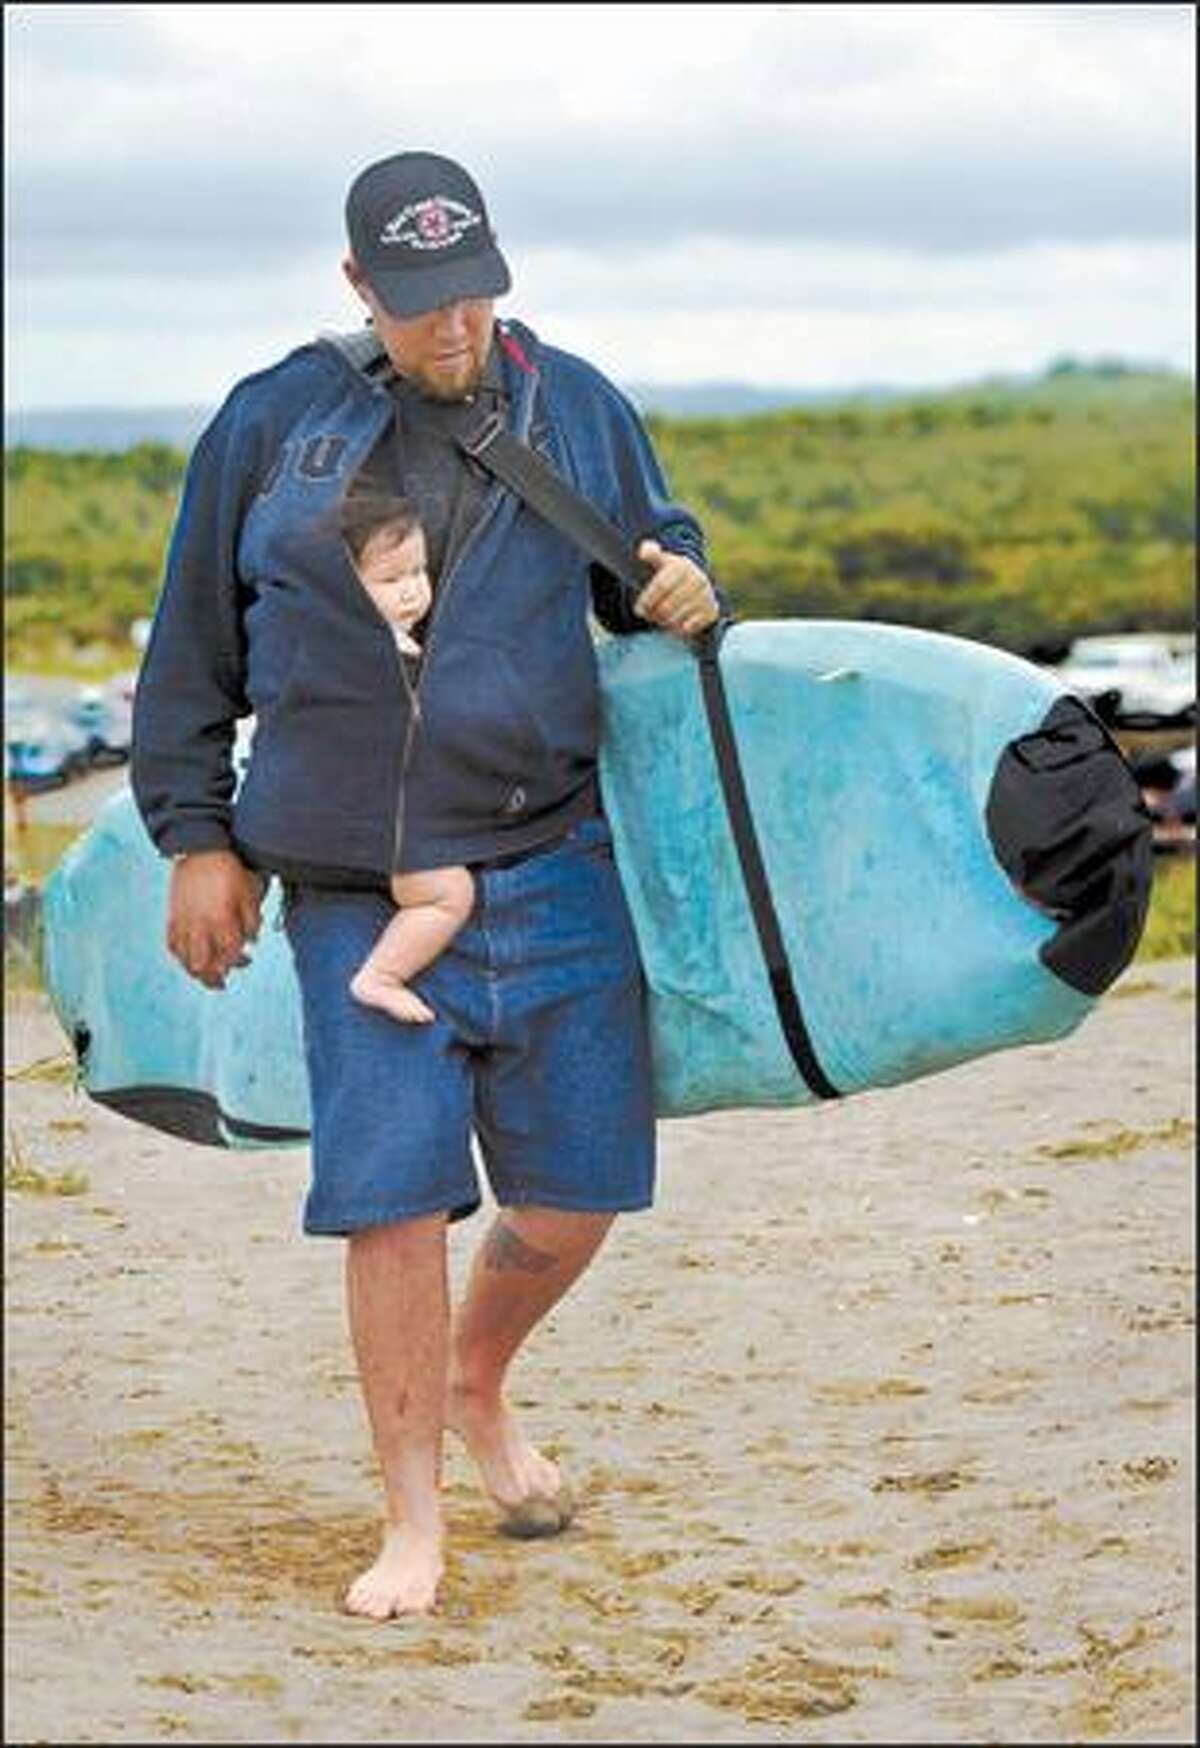 Marcel Peterson of McLeary brings his 8-month-old daughter, Jasai, to the beach during the Clean Water Classic in Westport on May 13.